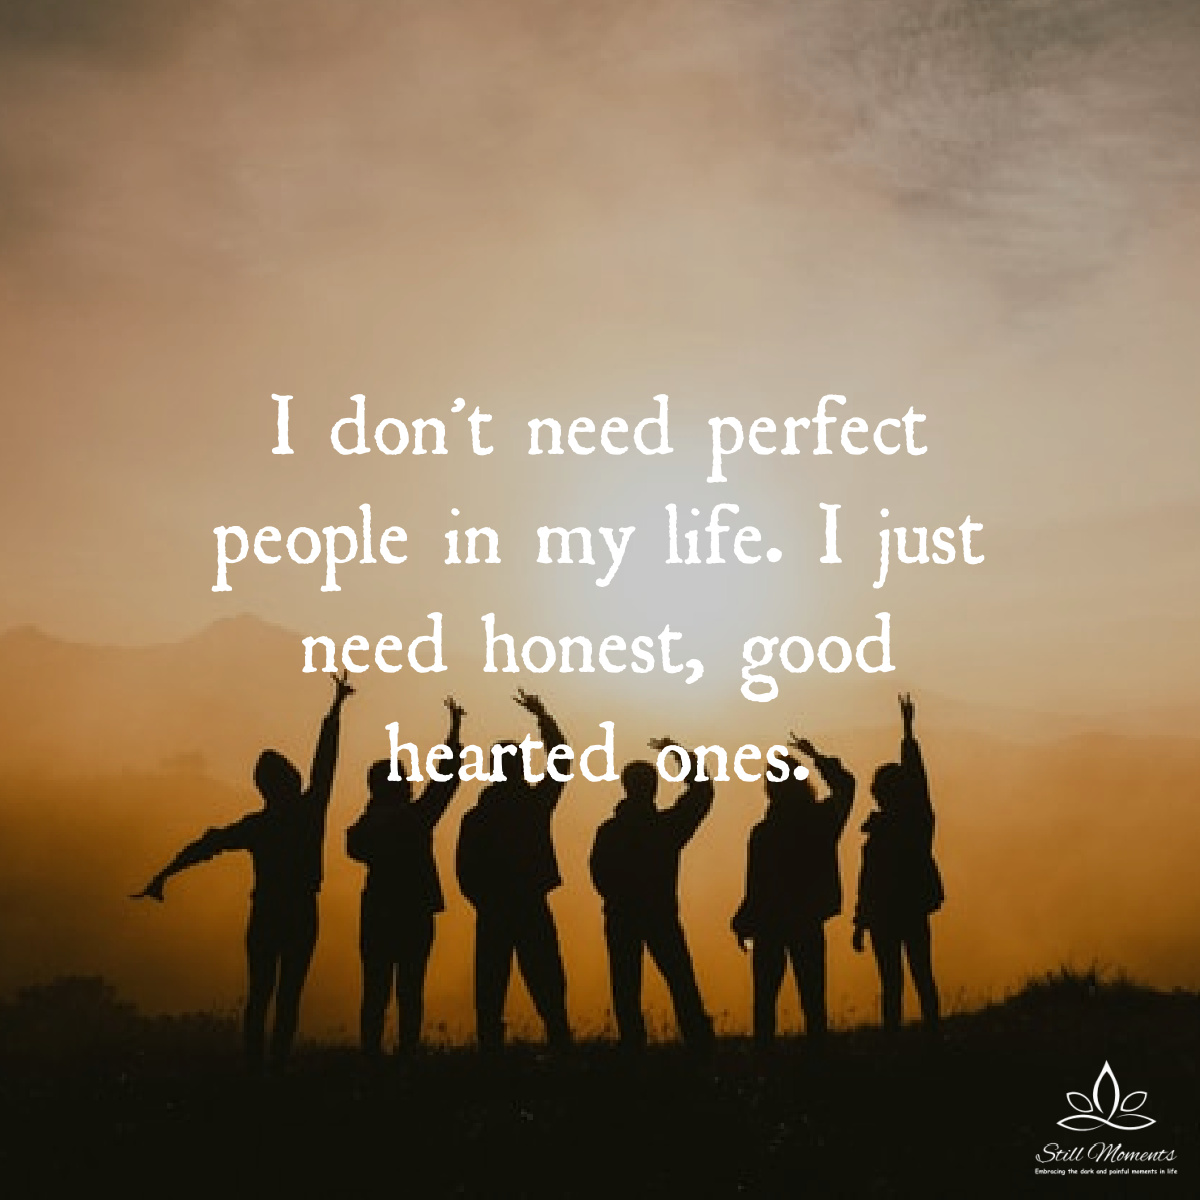 I Don’t Need Perfect People In My Life - Still Moments